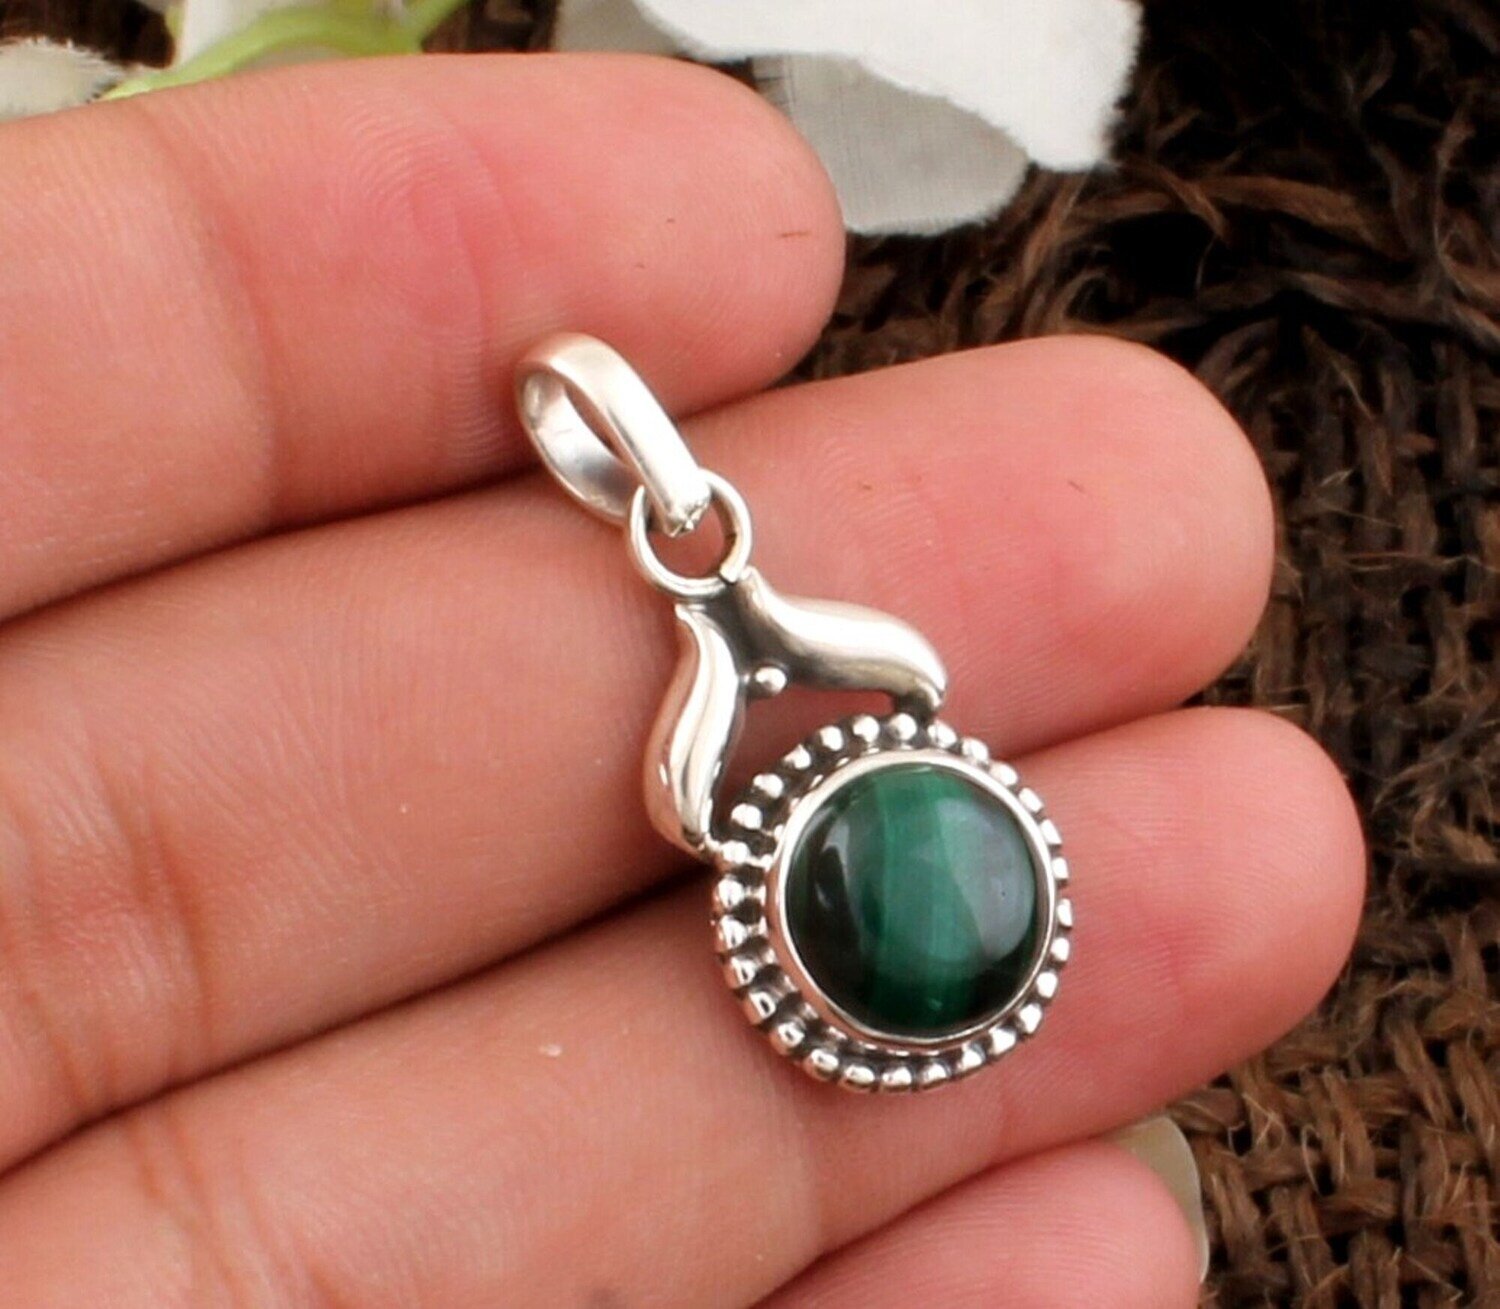 Malachite Gemstone Pendant 925 Sterling Silver Pendant Round Shape Gemstone Pendant Designer Handmade Pendant Women's Jewelry For Weddings Anniversary Gifts Her